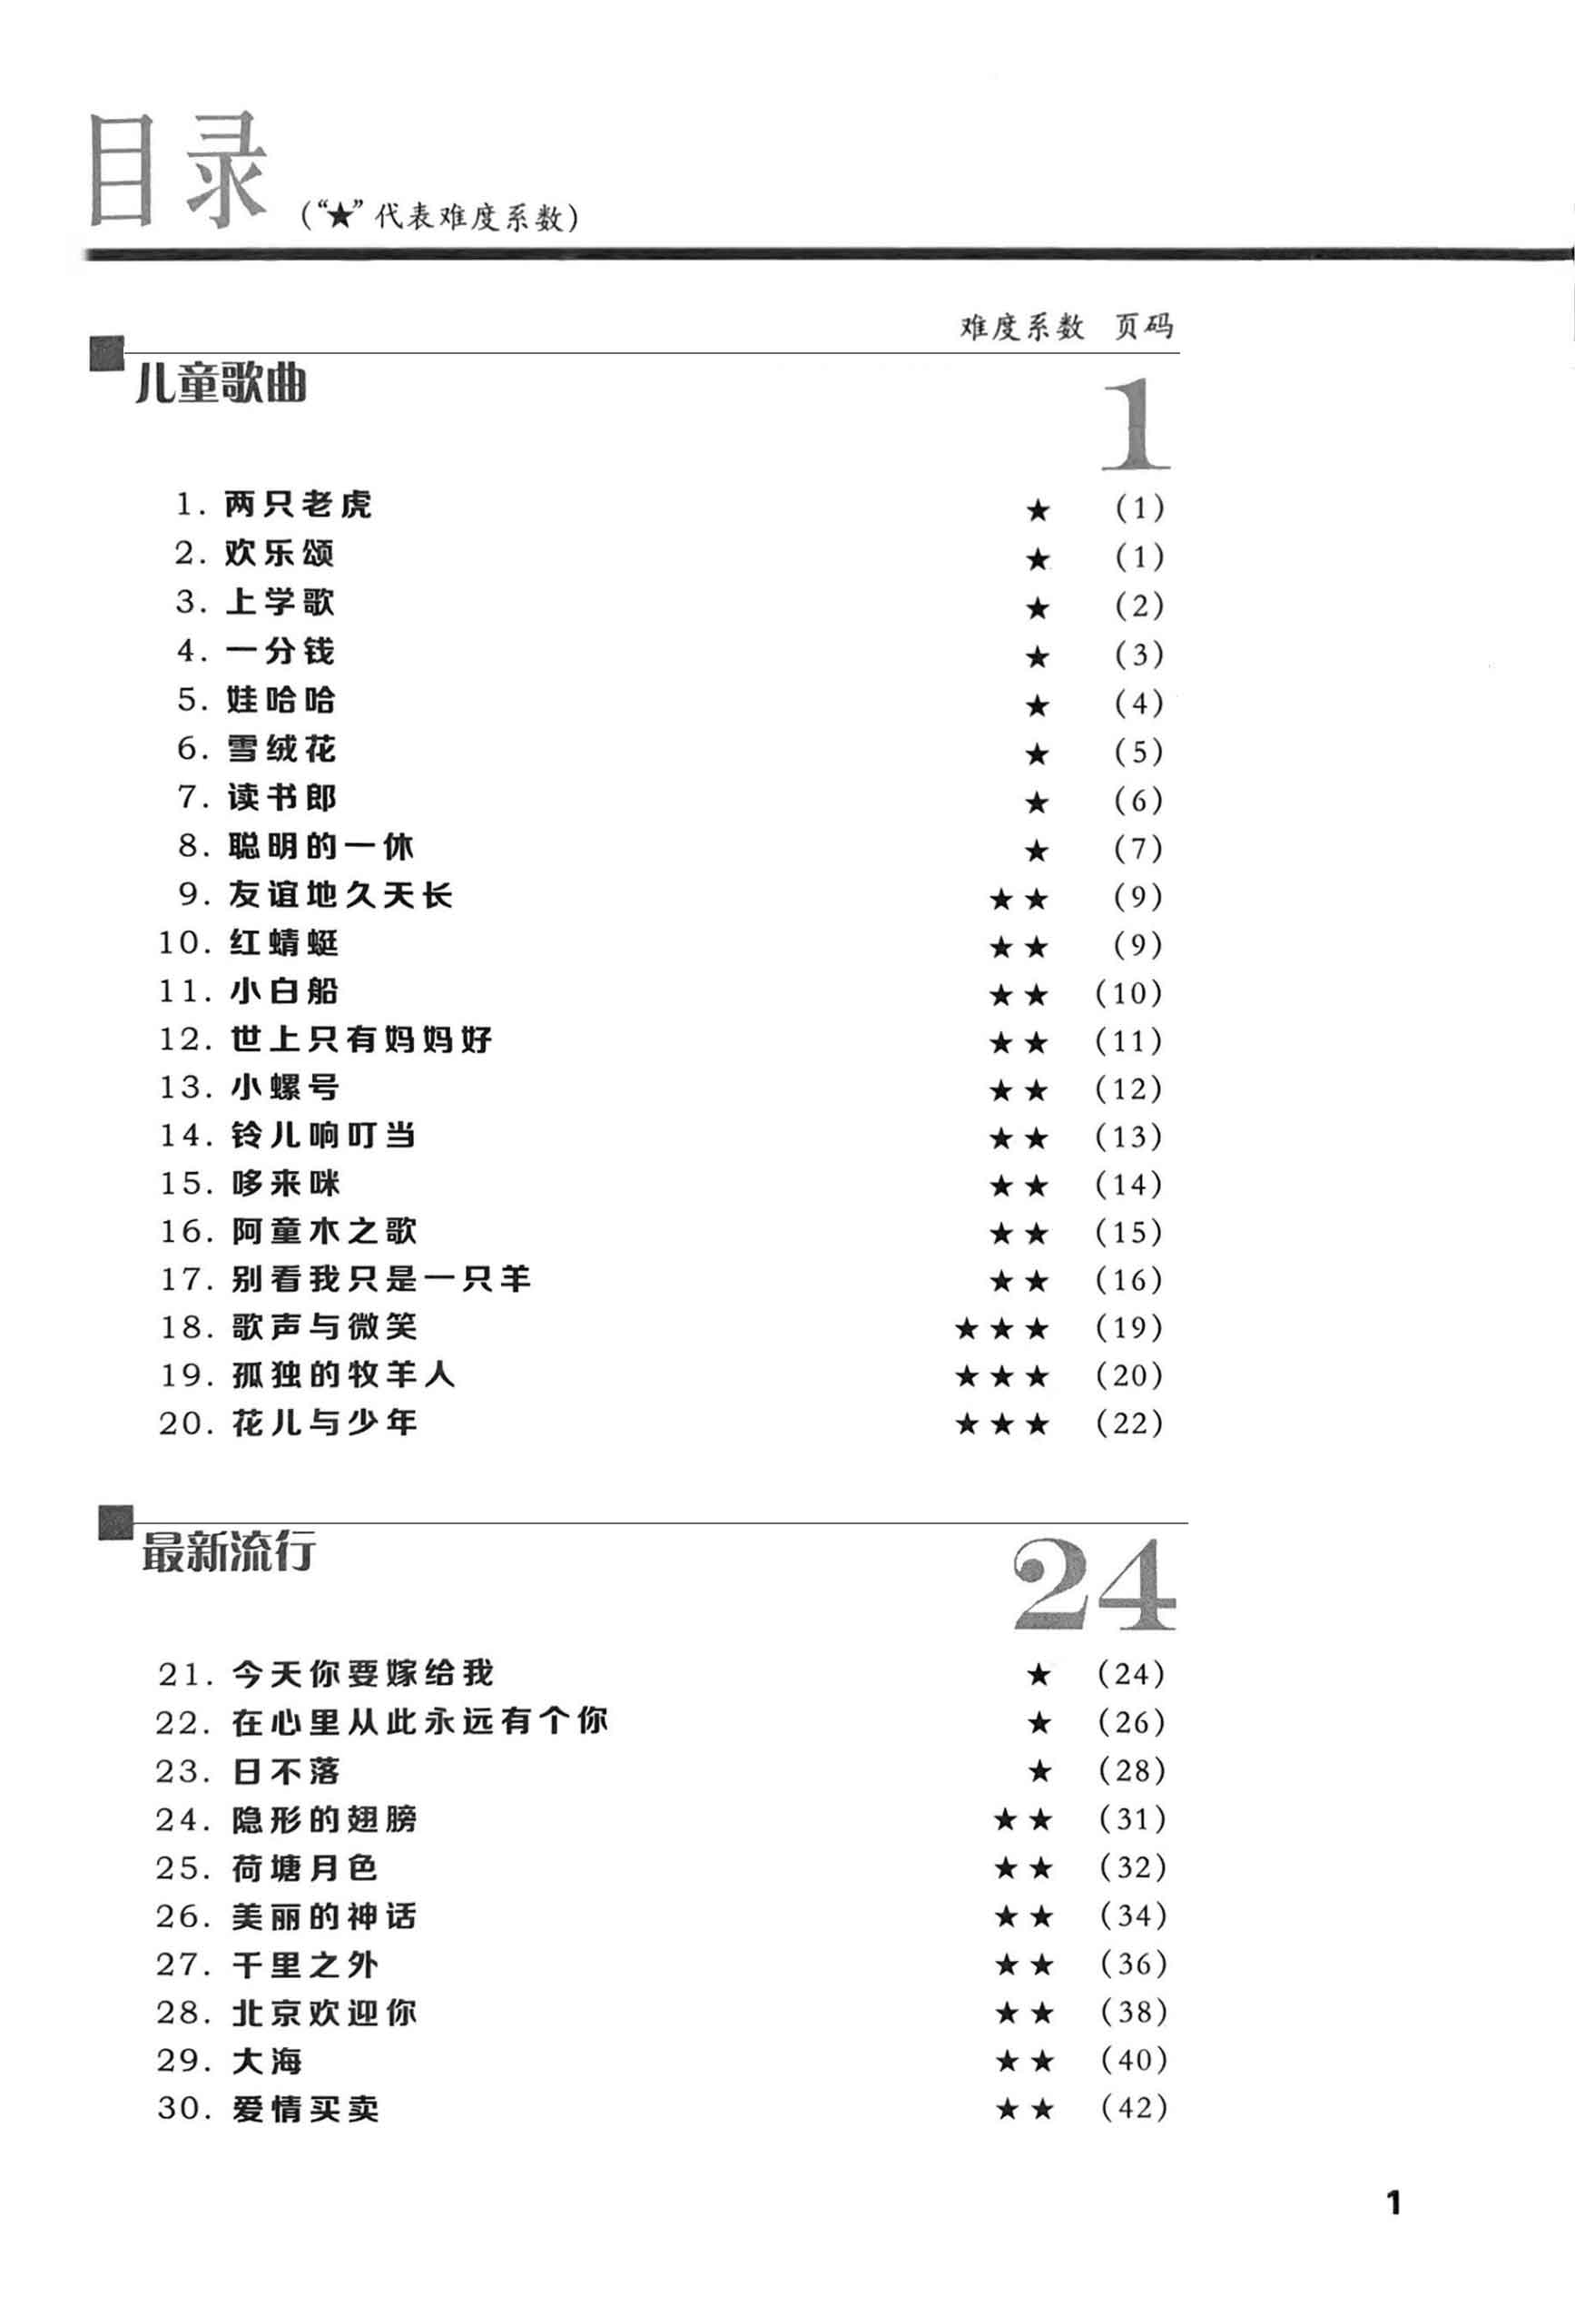 Erhu Pop Songs Book Content Page 1